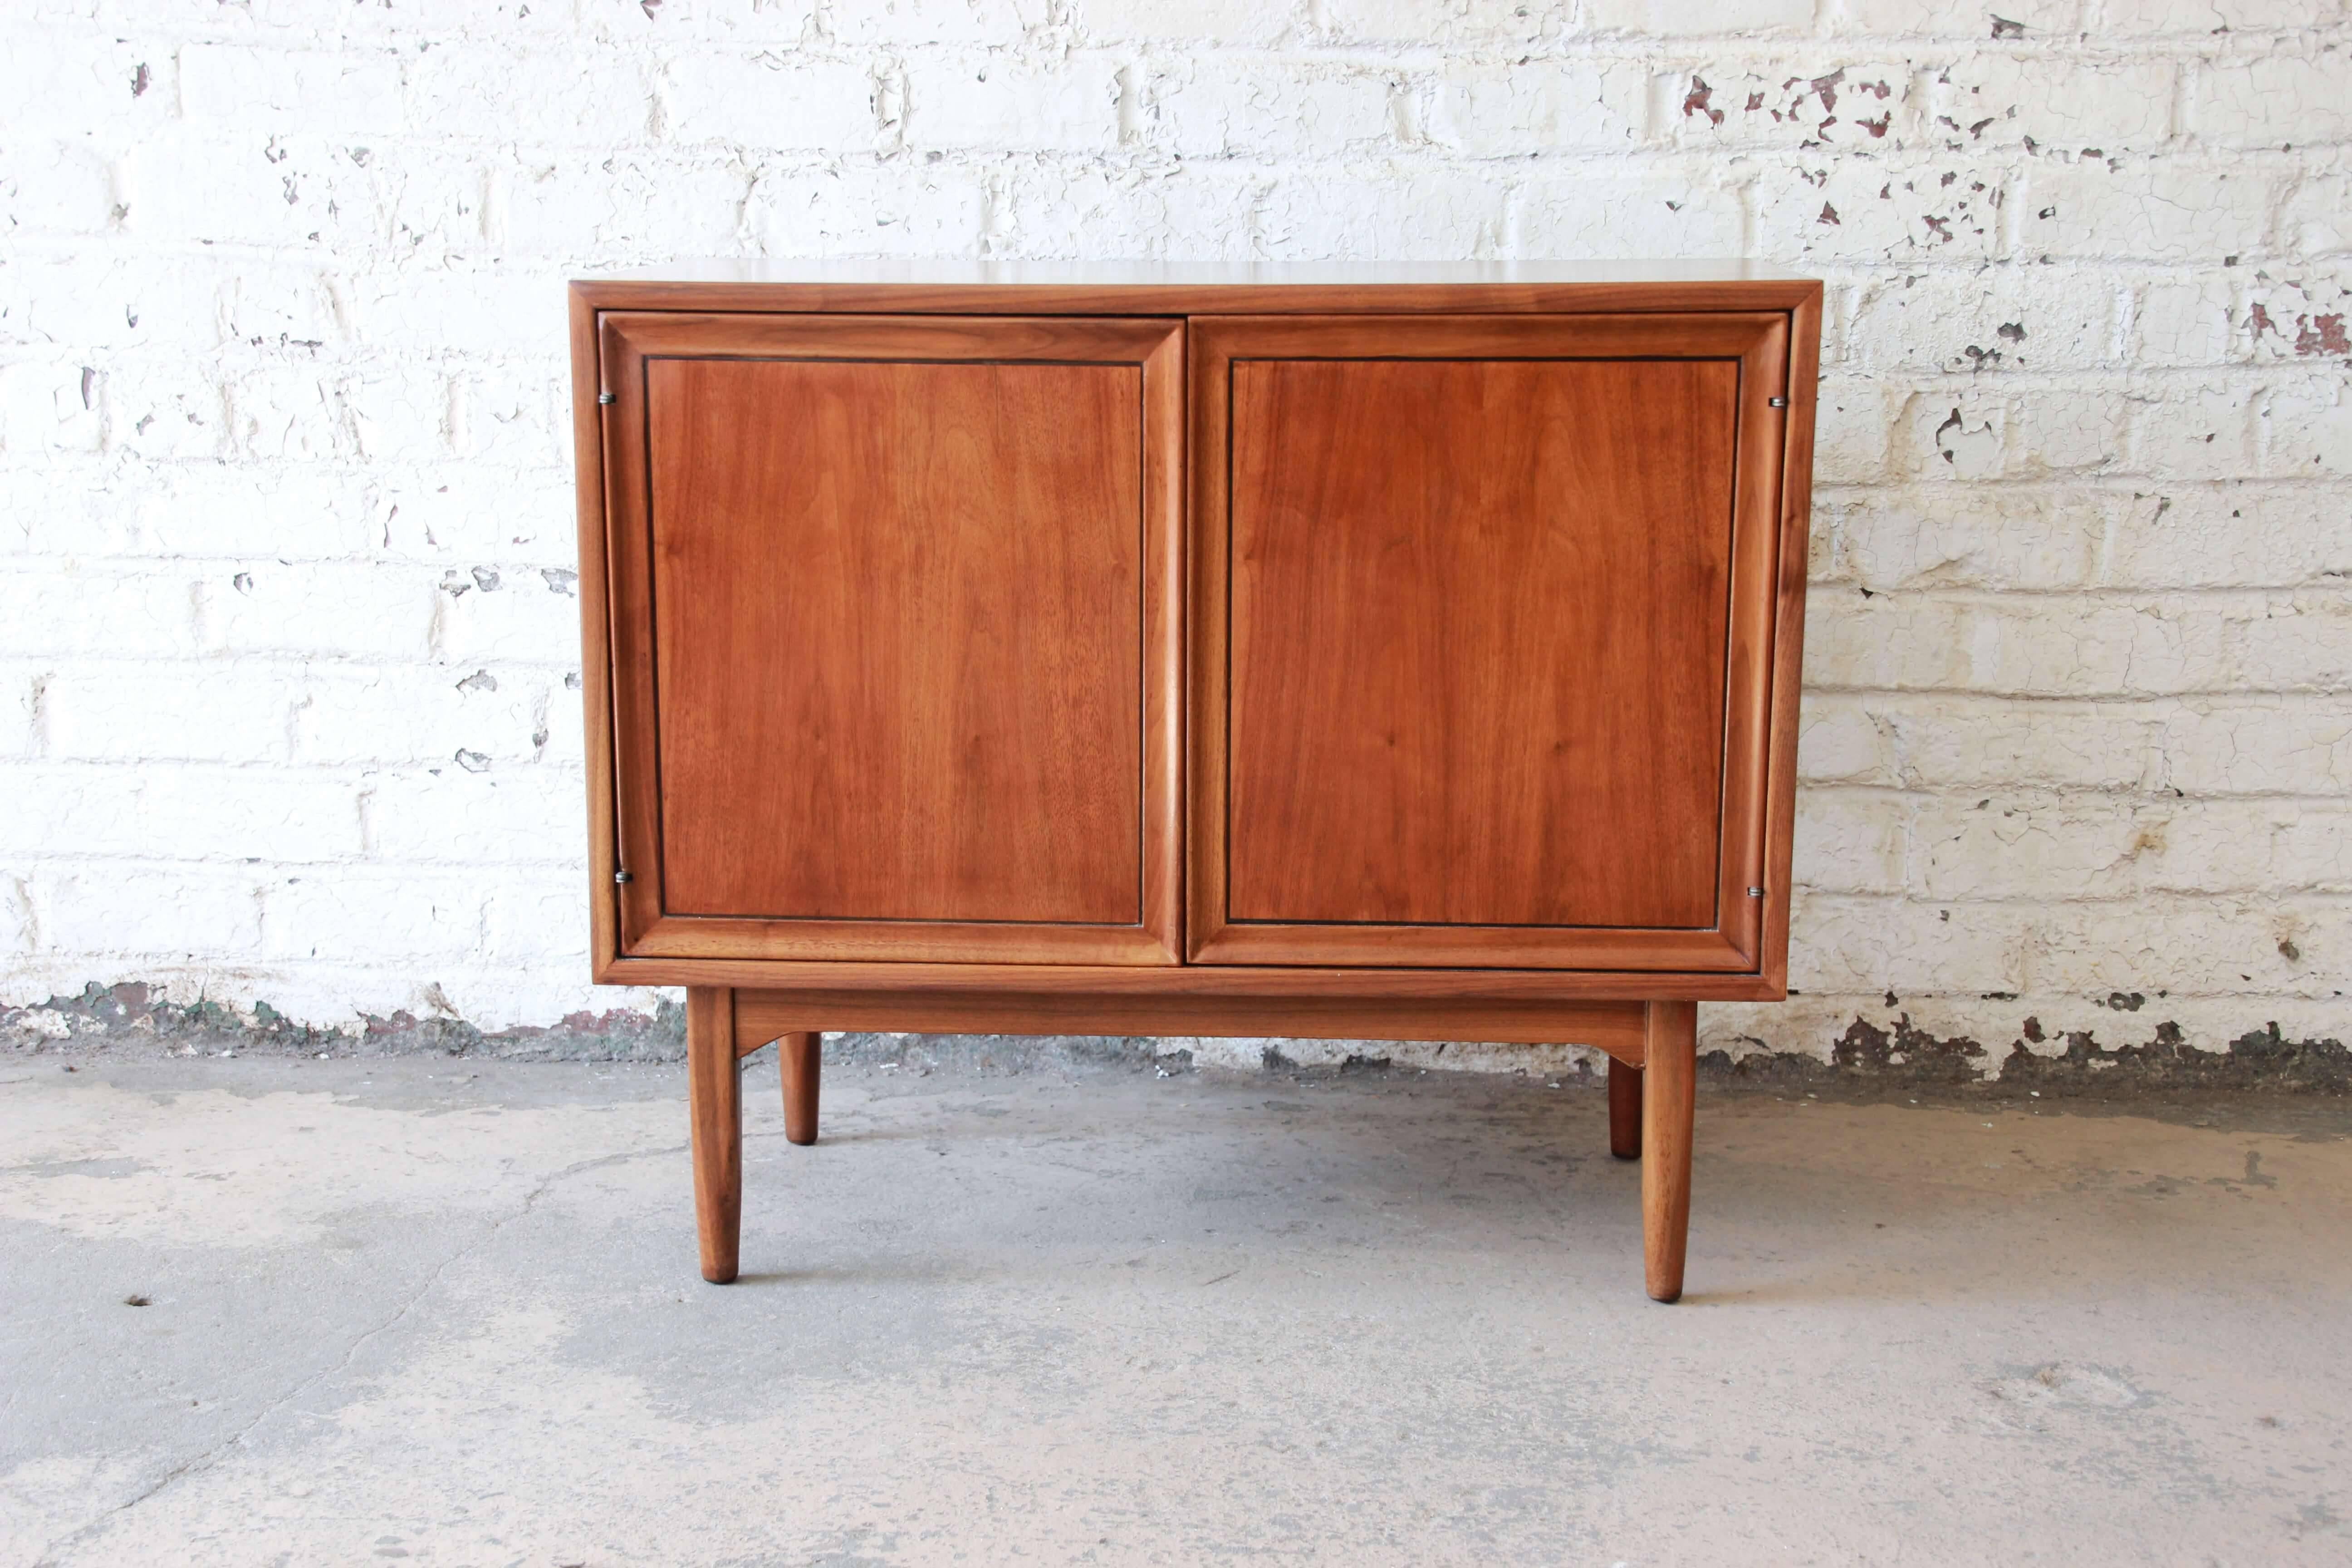 Offering a newly refinished and rare Kipp Stewart for Drexel record cabinet, circa 1963. The cabinet is newly refinished and has a beautiful walnut wood grain. The two cabinet door open up to reveal fourteen record slots and a small shelf area